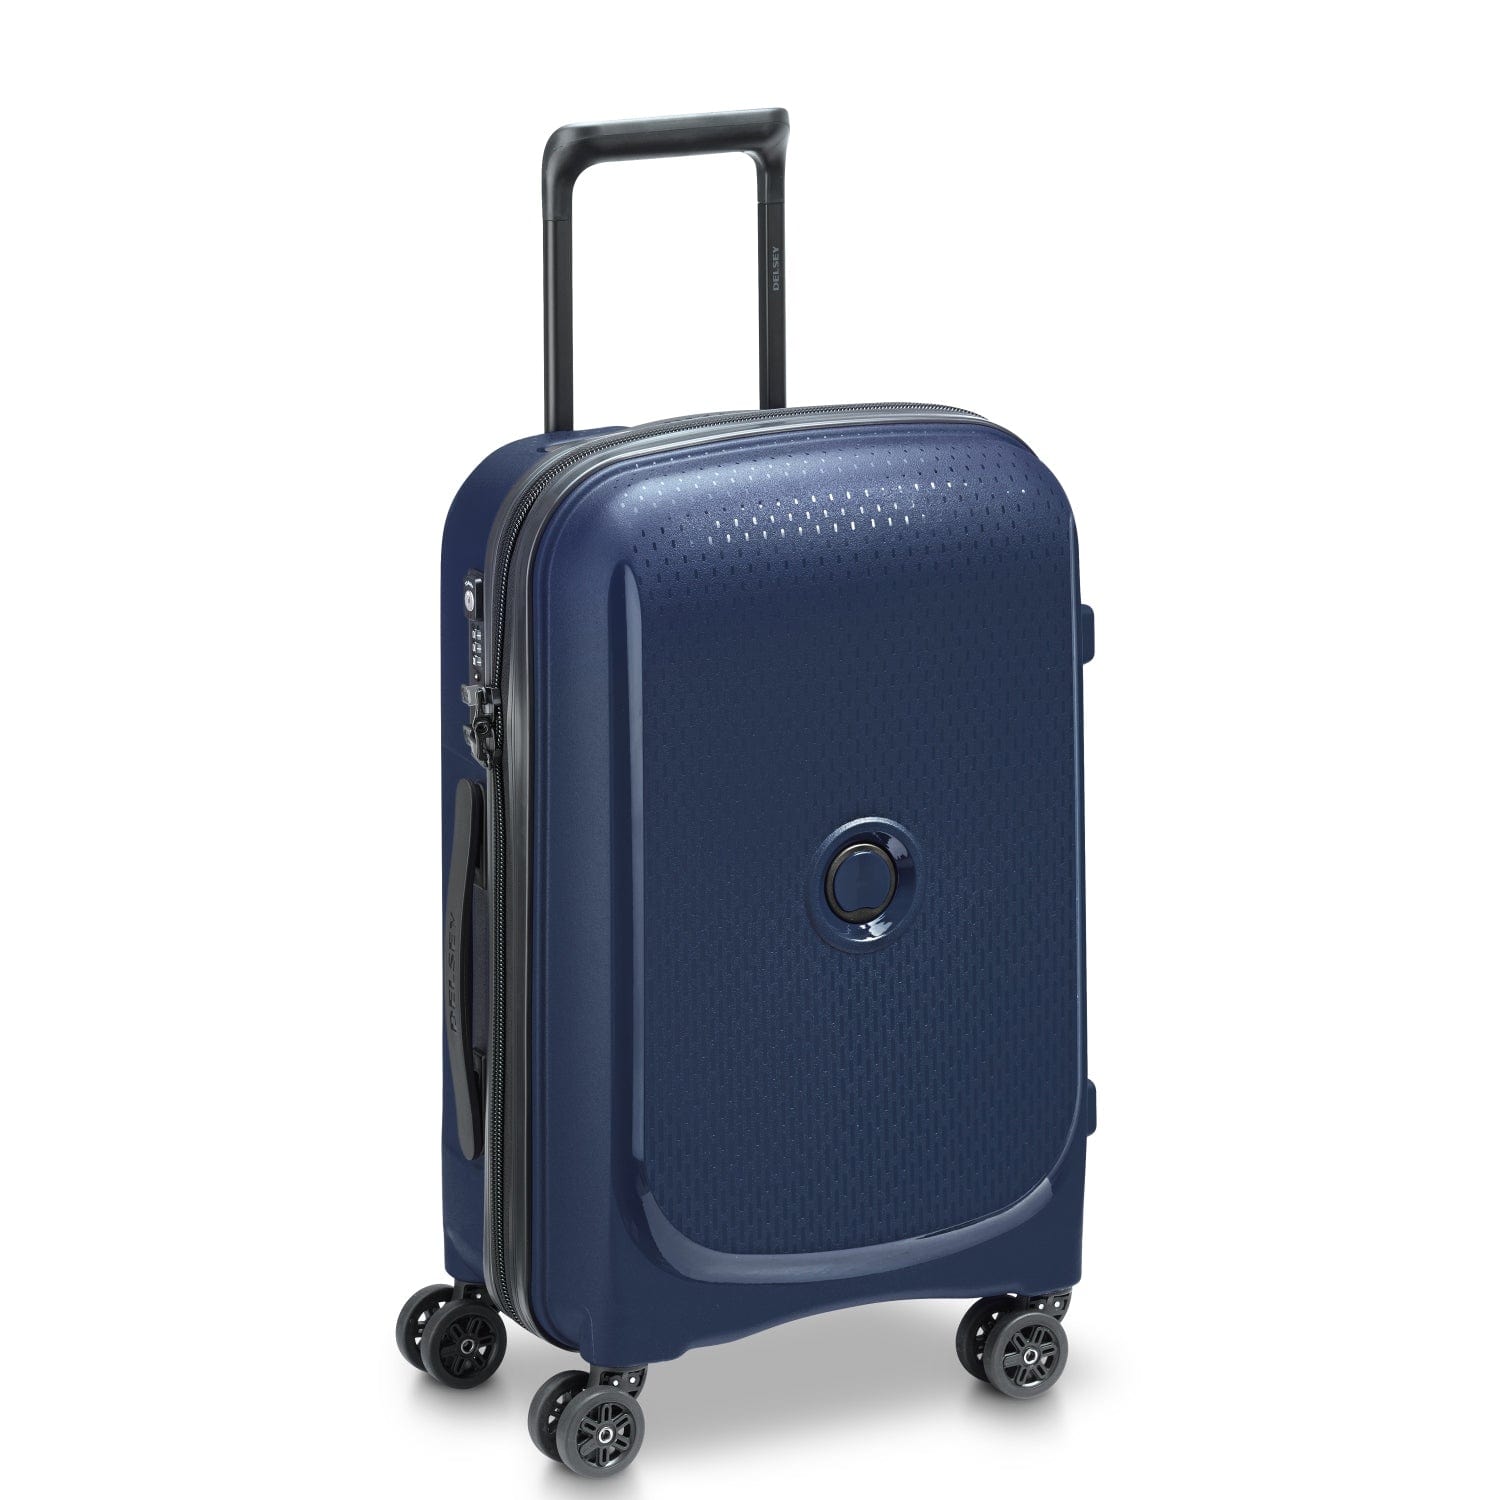 Delsey Belmont+ 55cm Hardcase 4 Double Wheel Non-Expandable Cabin Luggage Trolley Blue - 00386180602